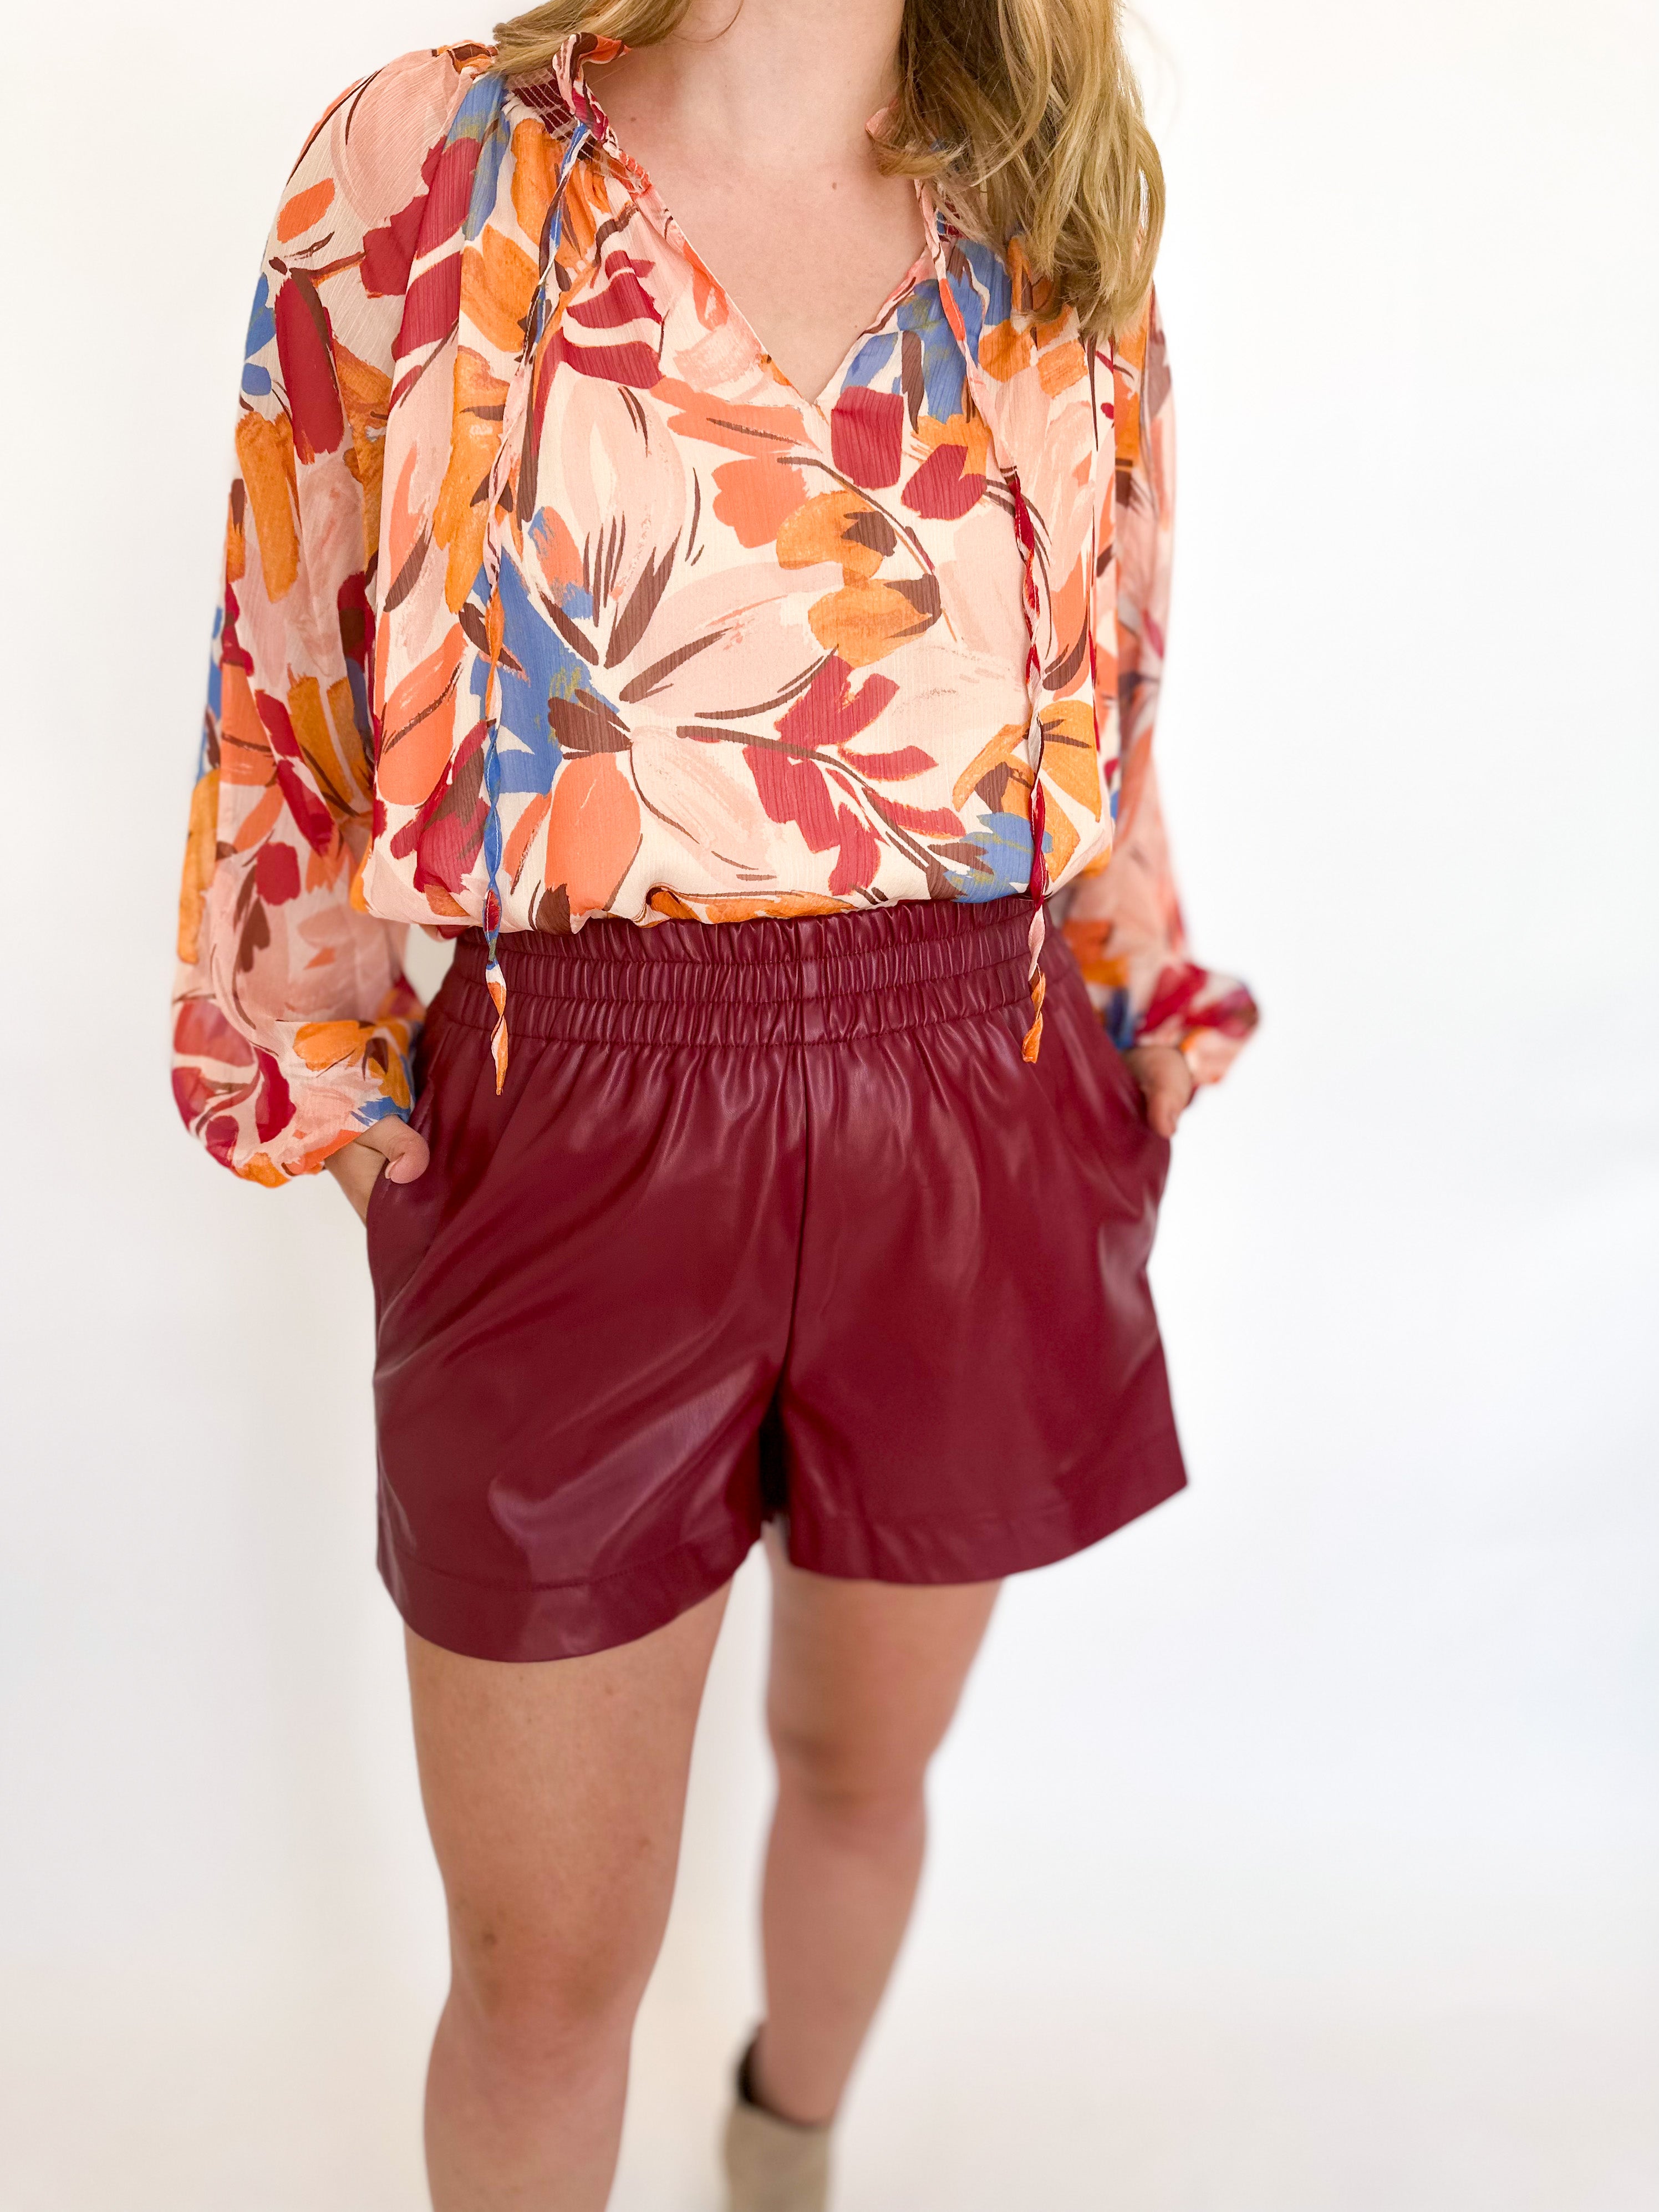 Faux Leather Elastic Shorts- Wine-410 Shorts/Skirts-ENTRO-July & June Women's Fashion Boutique Located in San Antonio, Texas